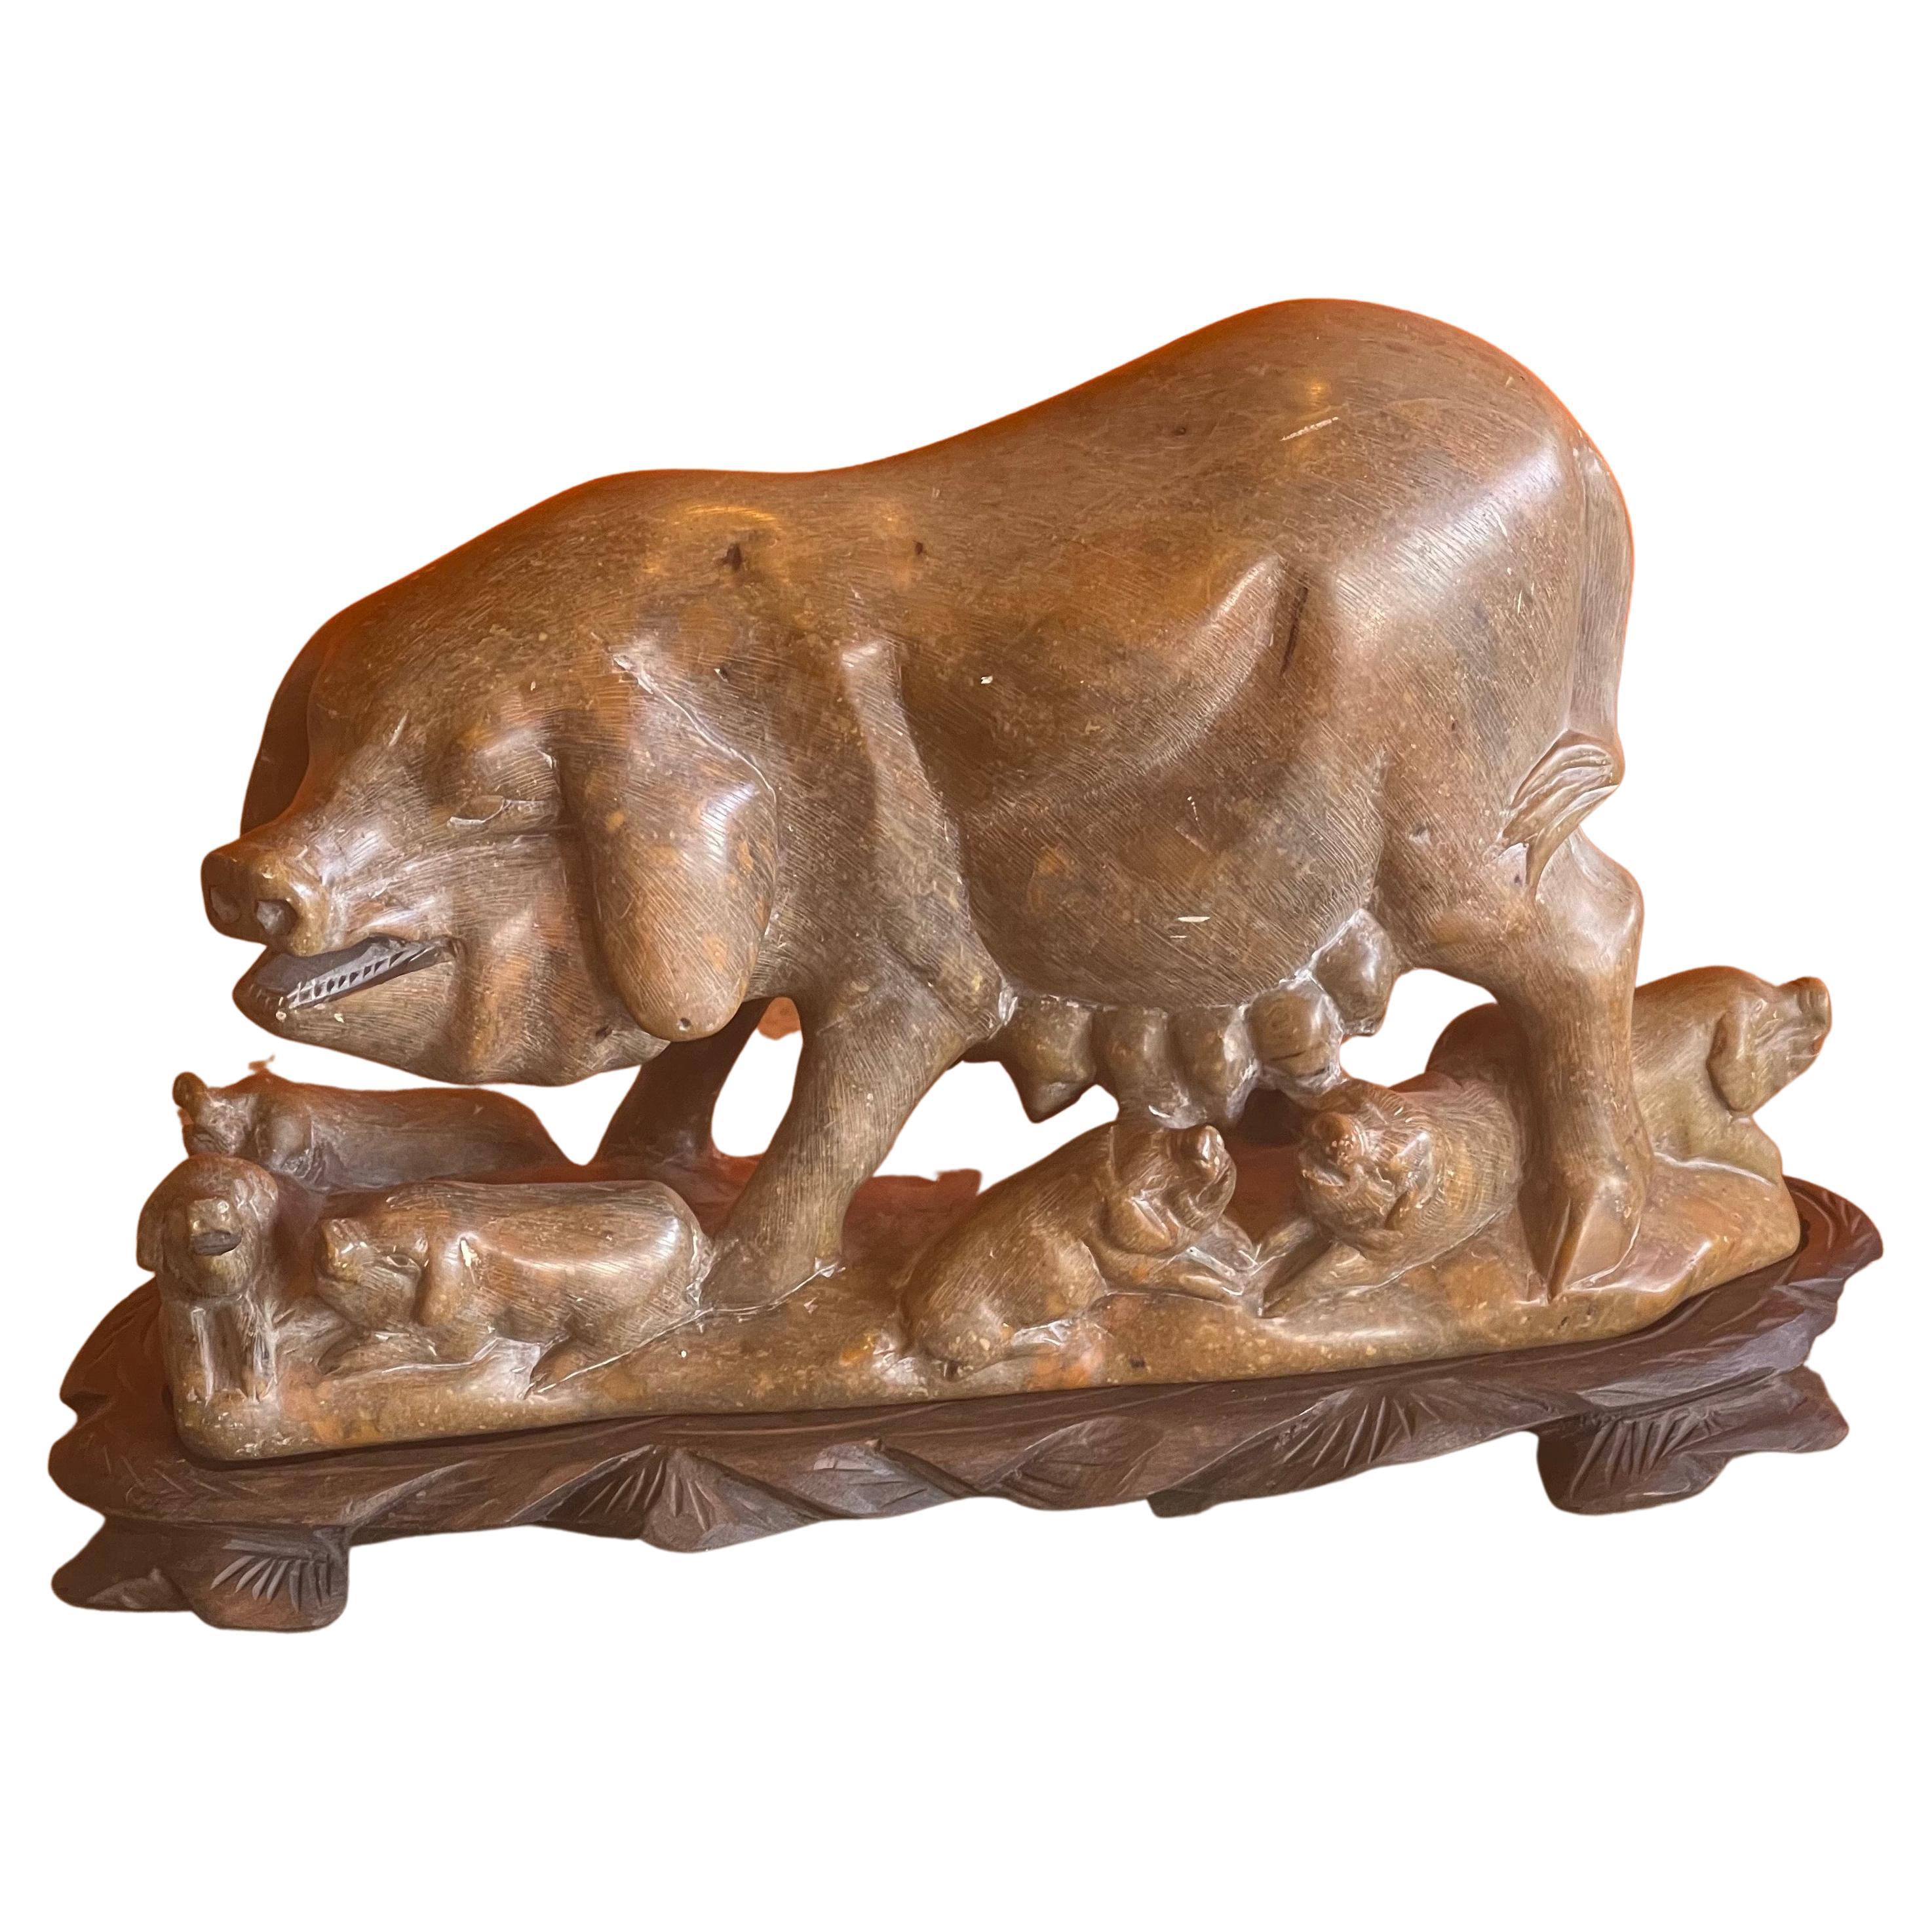 Vintage Chinese Soapstone Pig Sculpture on Carved Wood Base For Sale